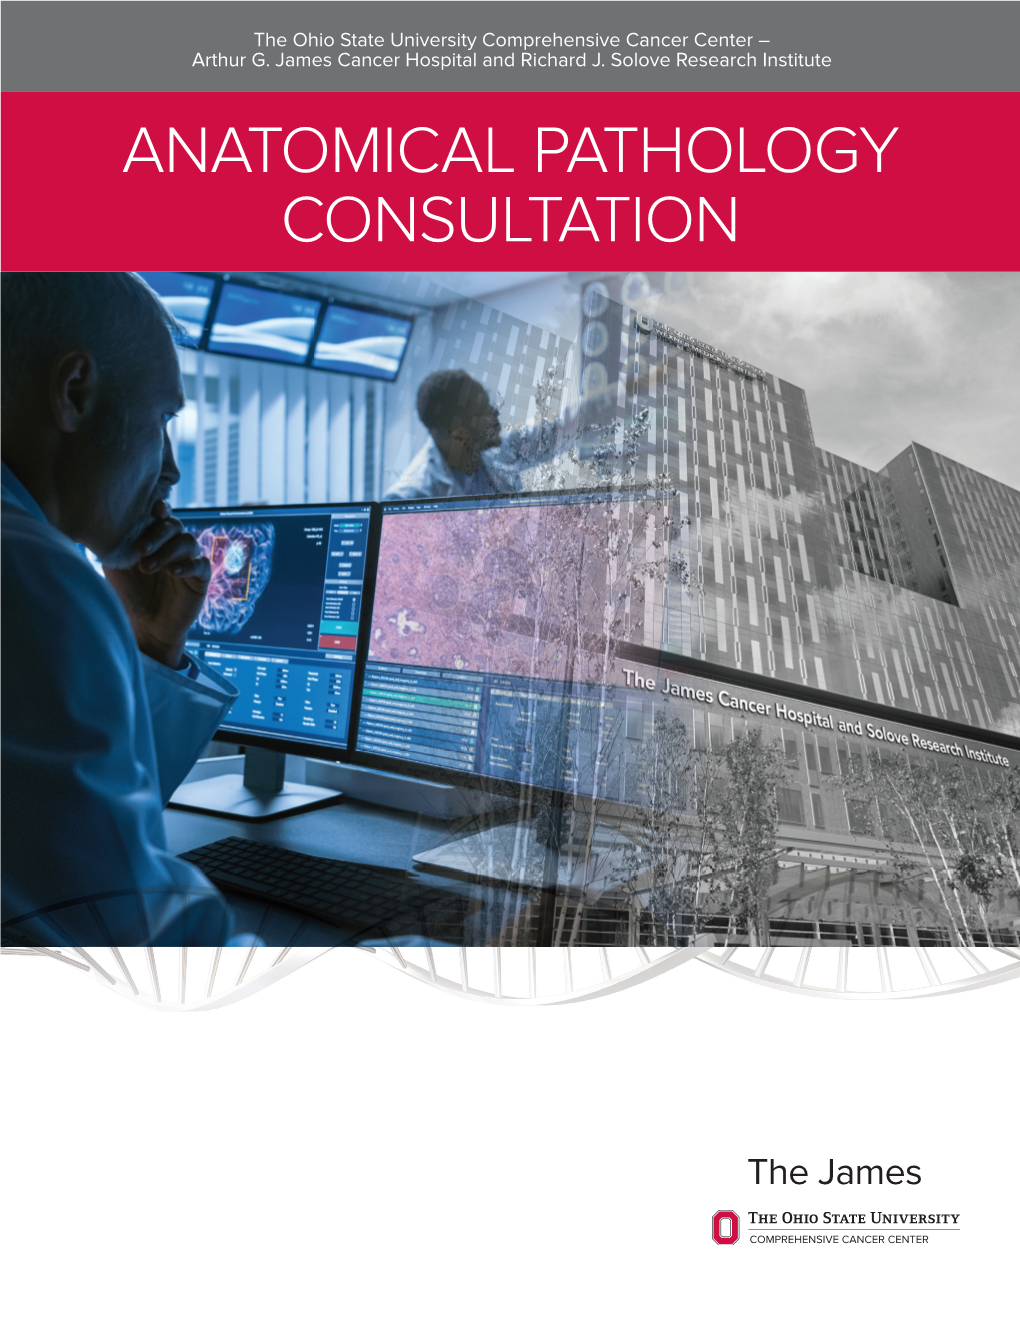 Consult Physicians Brochure